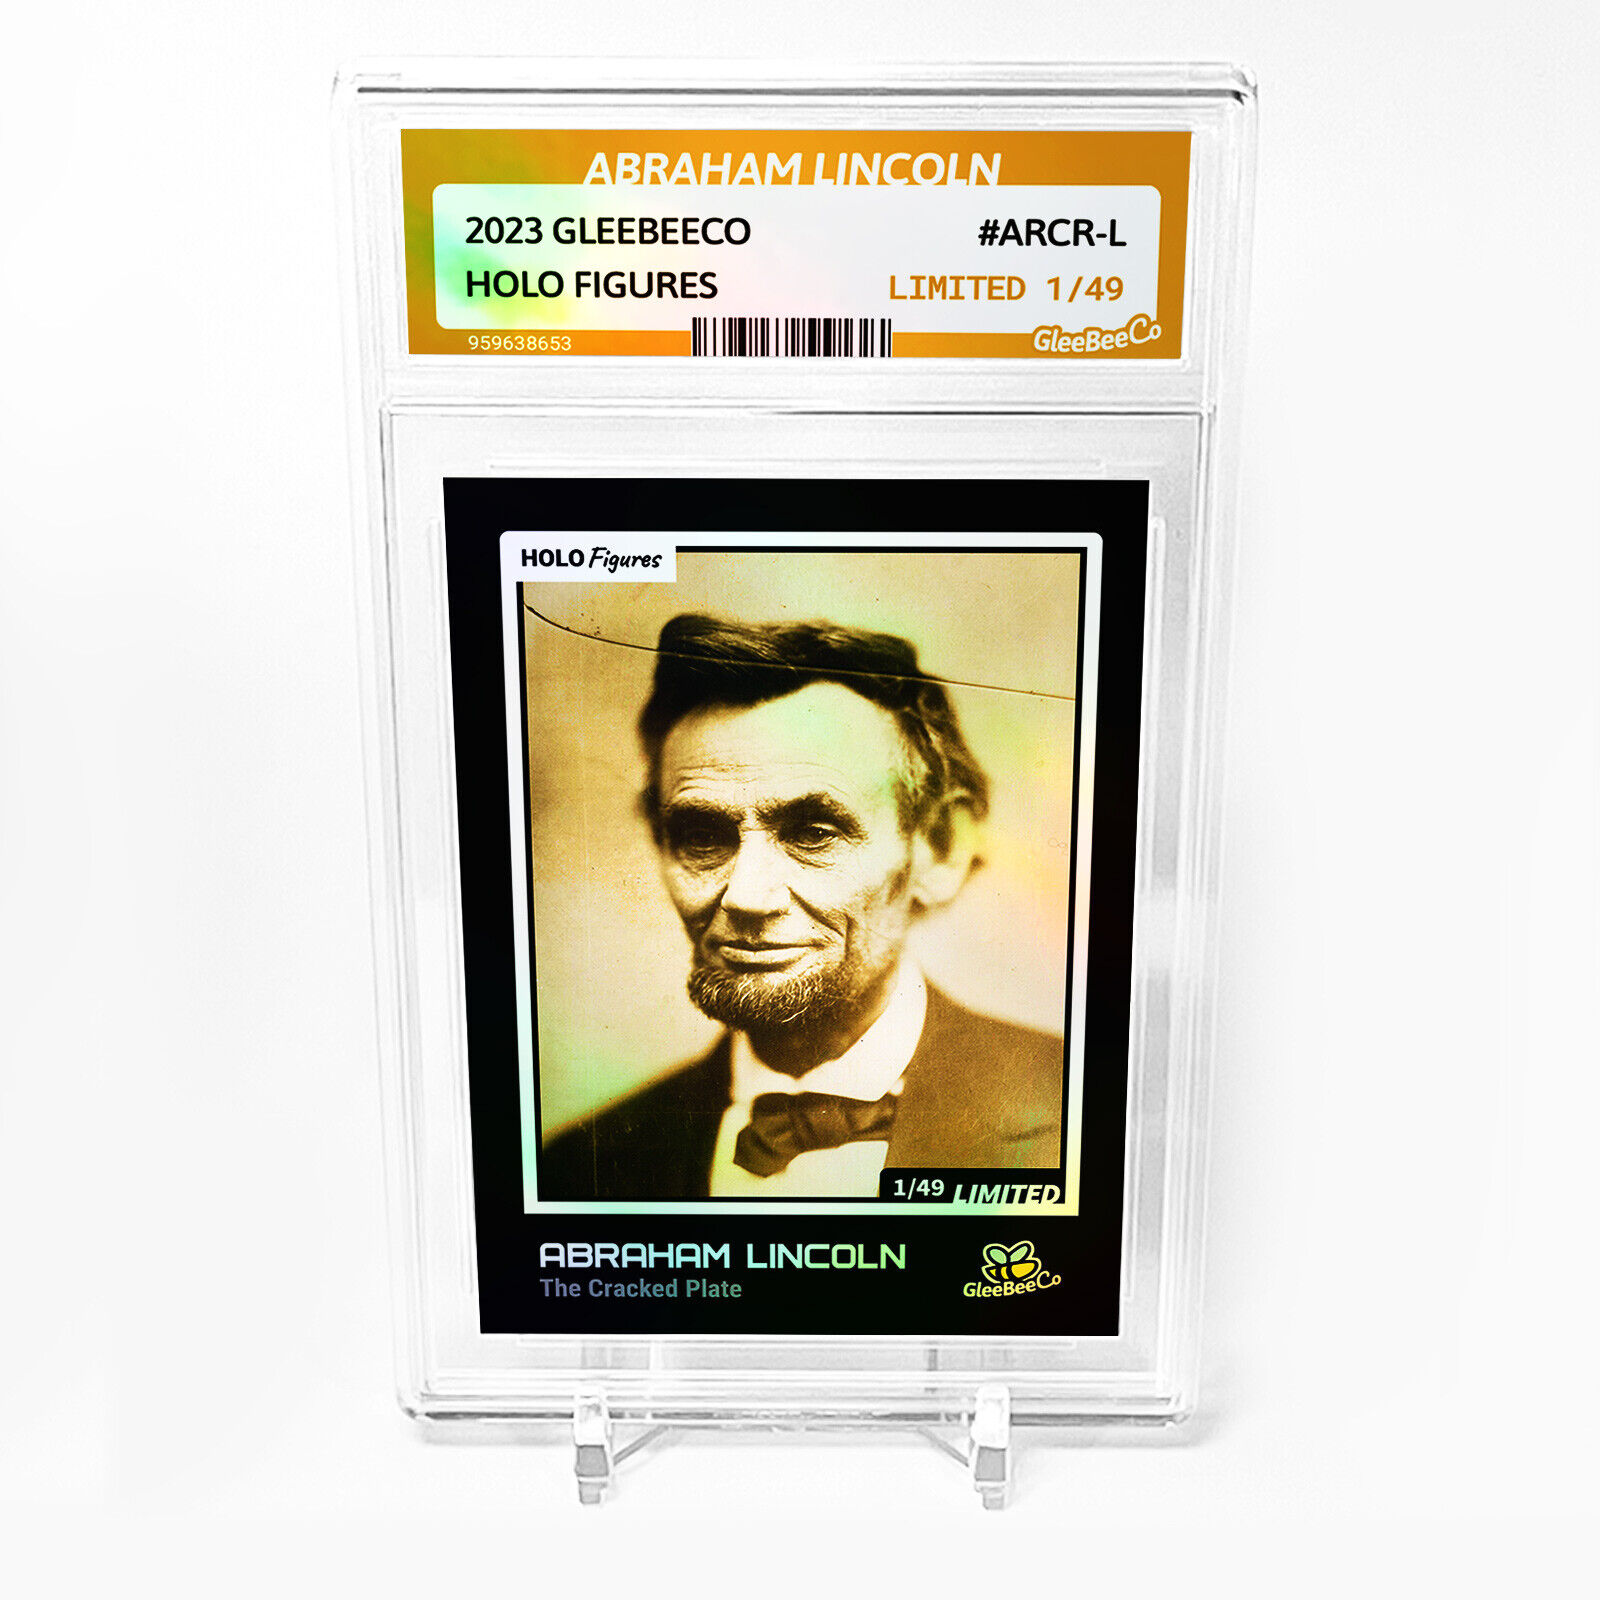 ABRAHAM LINCOLN Card 2023 GleeBeeCo Cracked Plate Holo #ARCR-L /49 - NICE